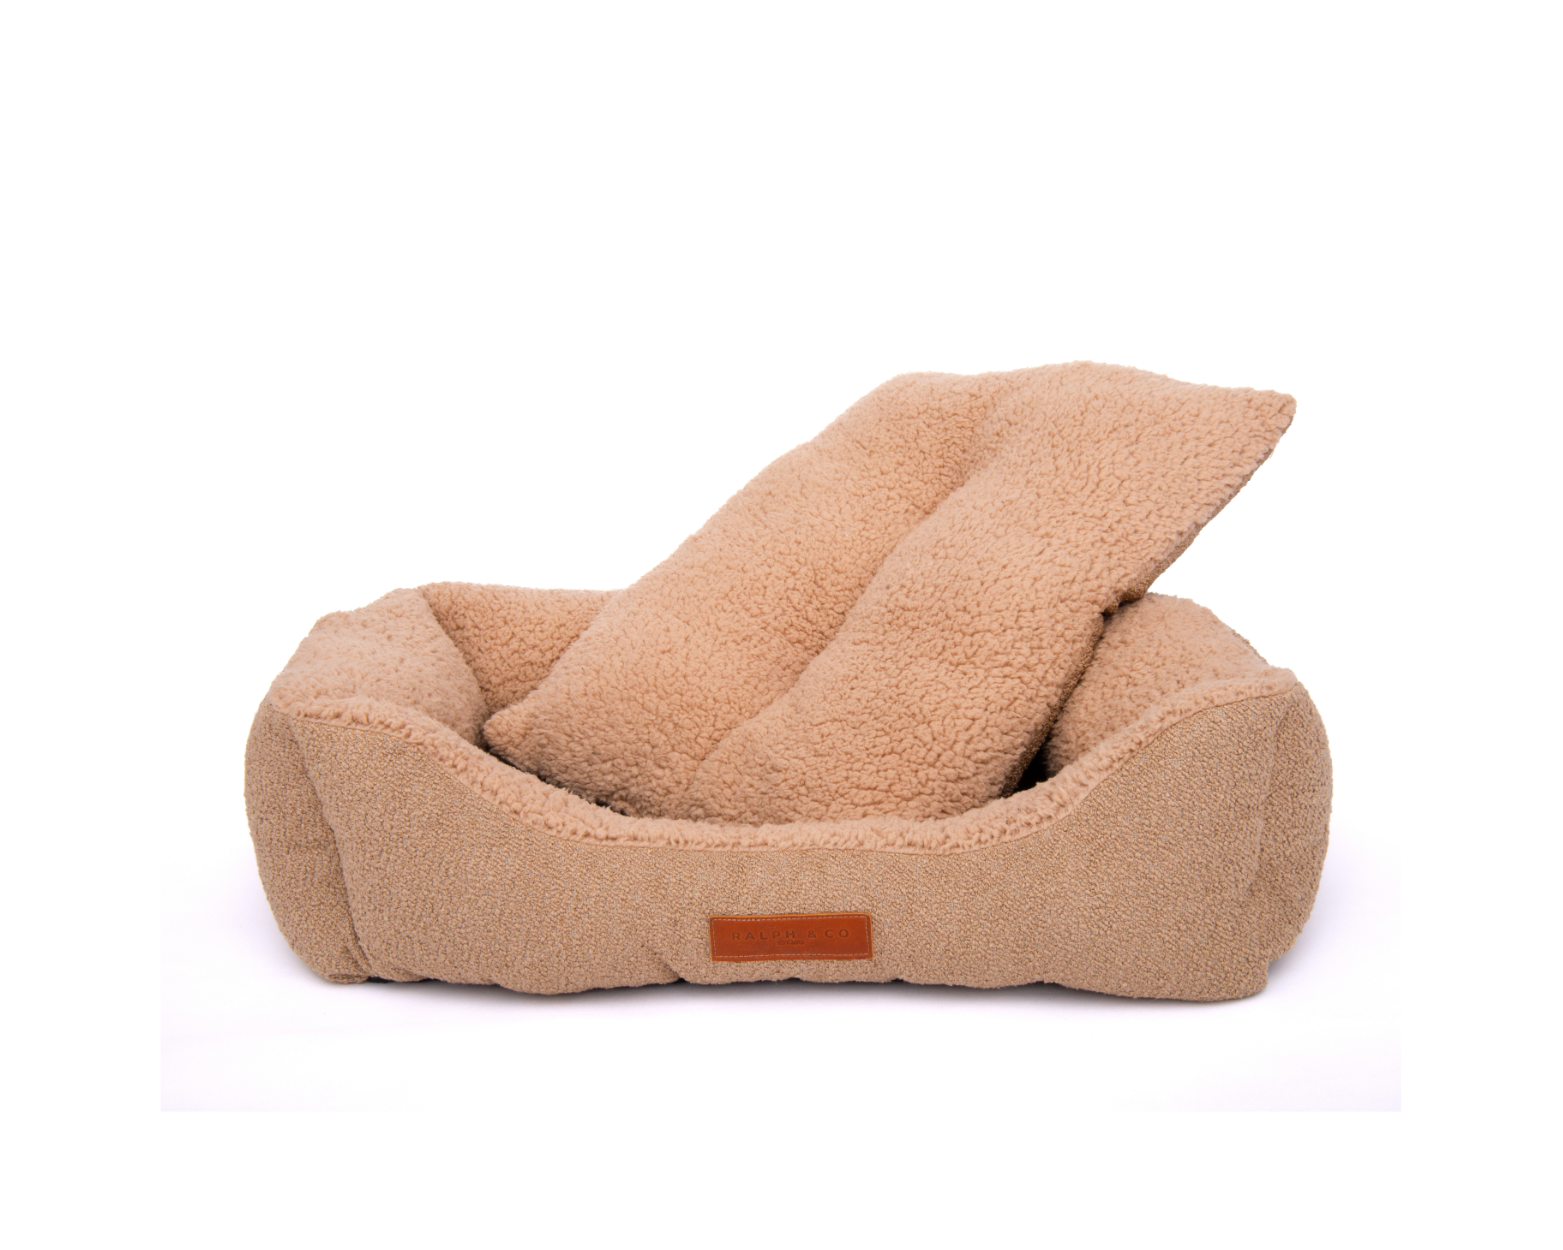 Product shot featuring the Teddington nest bed with the cushion visible